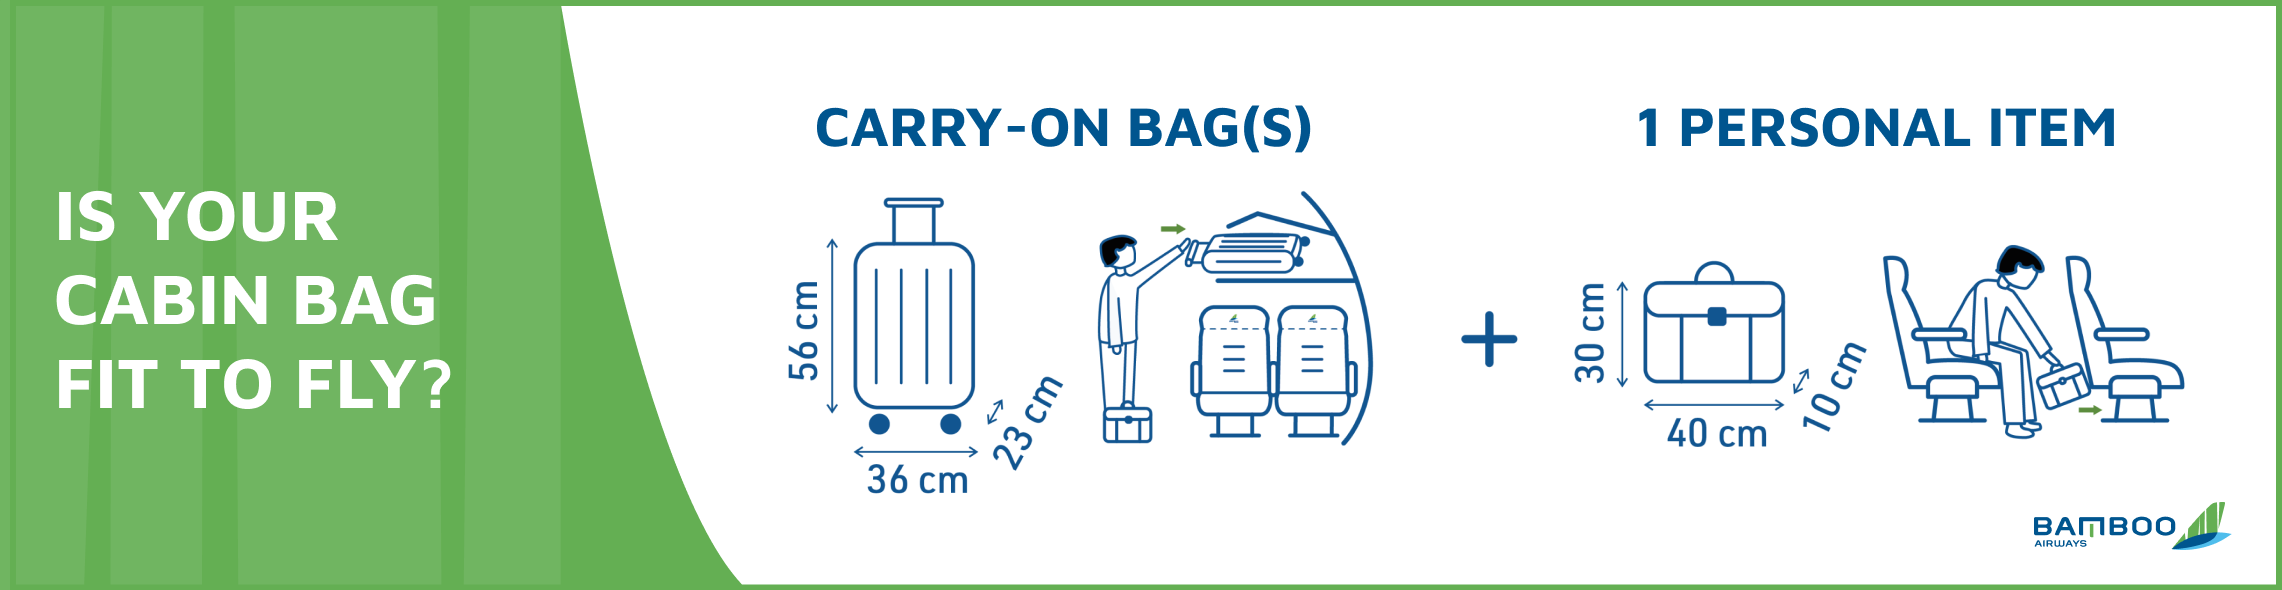 Carry On Bag Size For Airlines In Southeast Asia